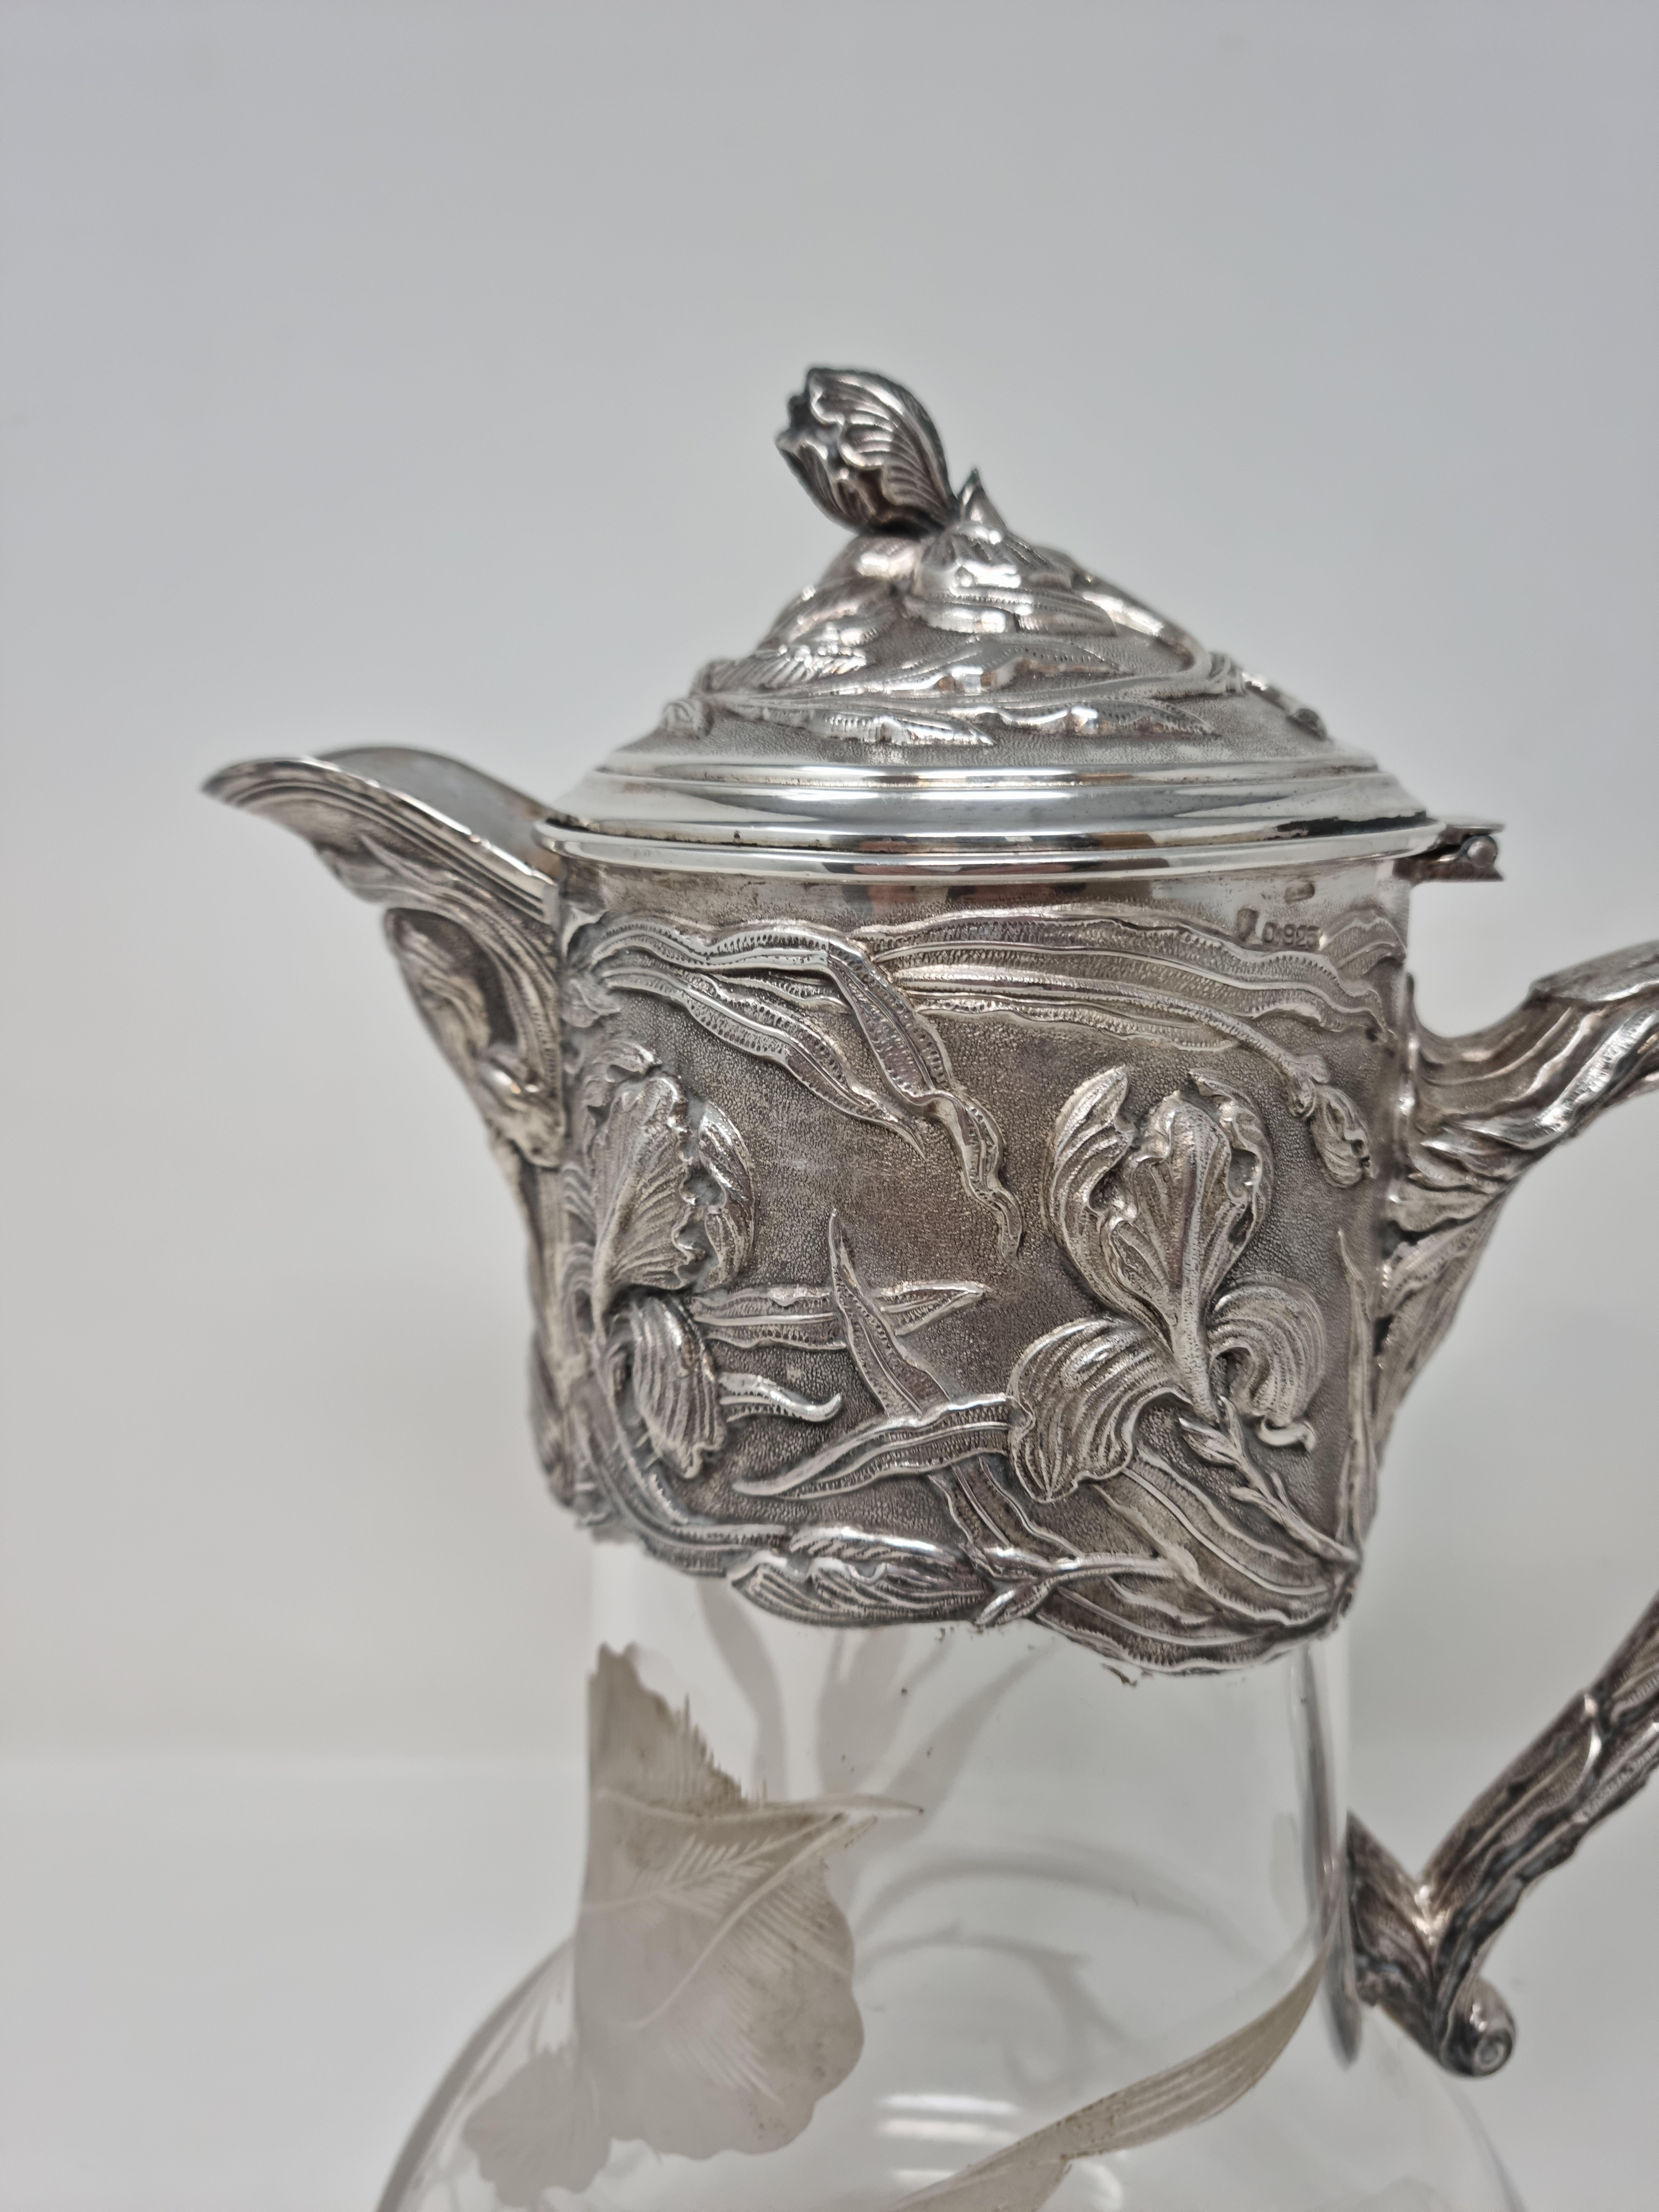 Elegant claret Jug (wine jug) in acid-etched crystal with French silver frame embossed with the following engraving: Presented by Vice Admiral H:S:H: Prince Luis Von Battemberg, won by Captain Keyes 22 October 1909
Admiral’s Cup - Atlantic Fleet